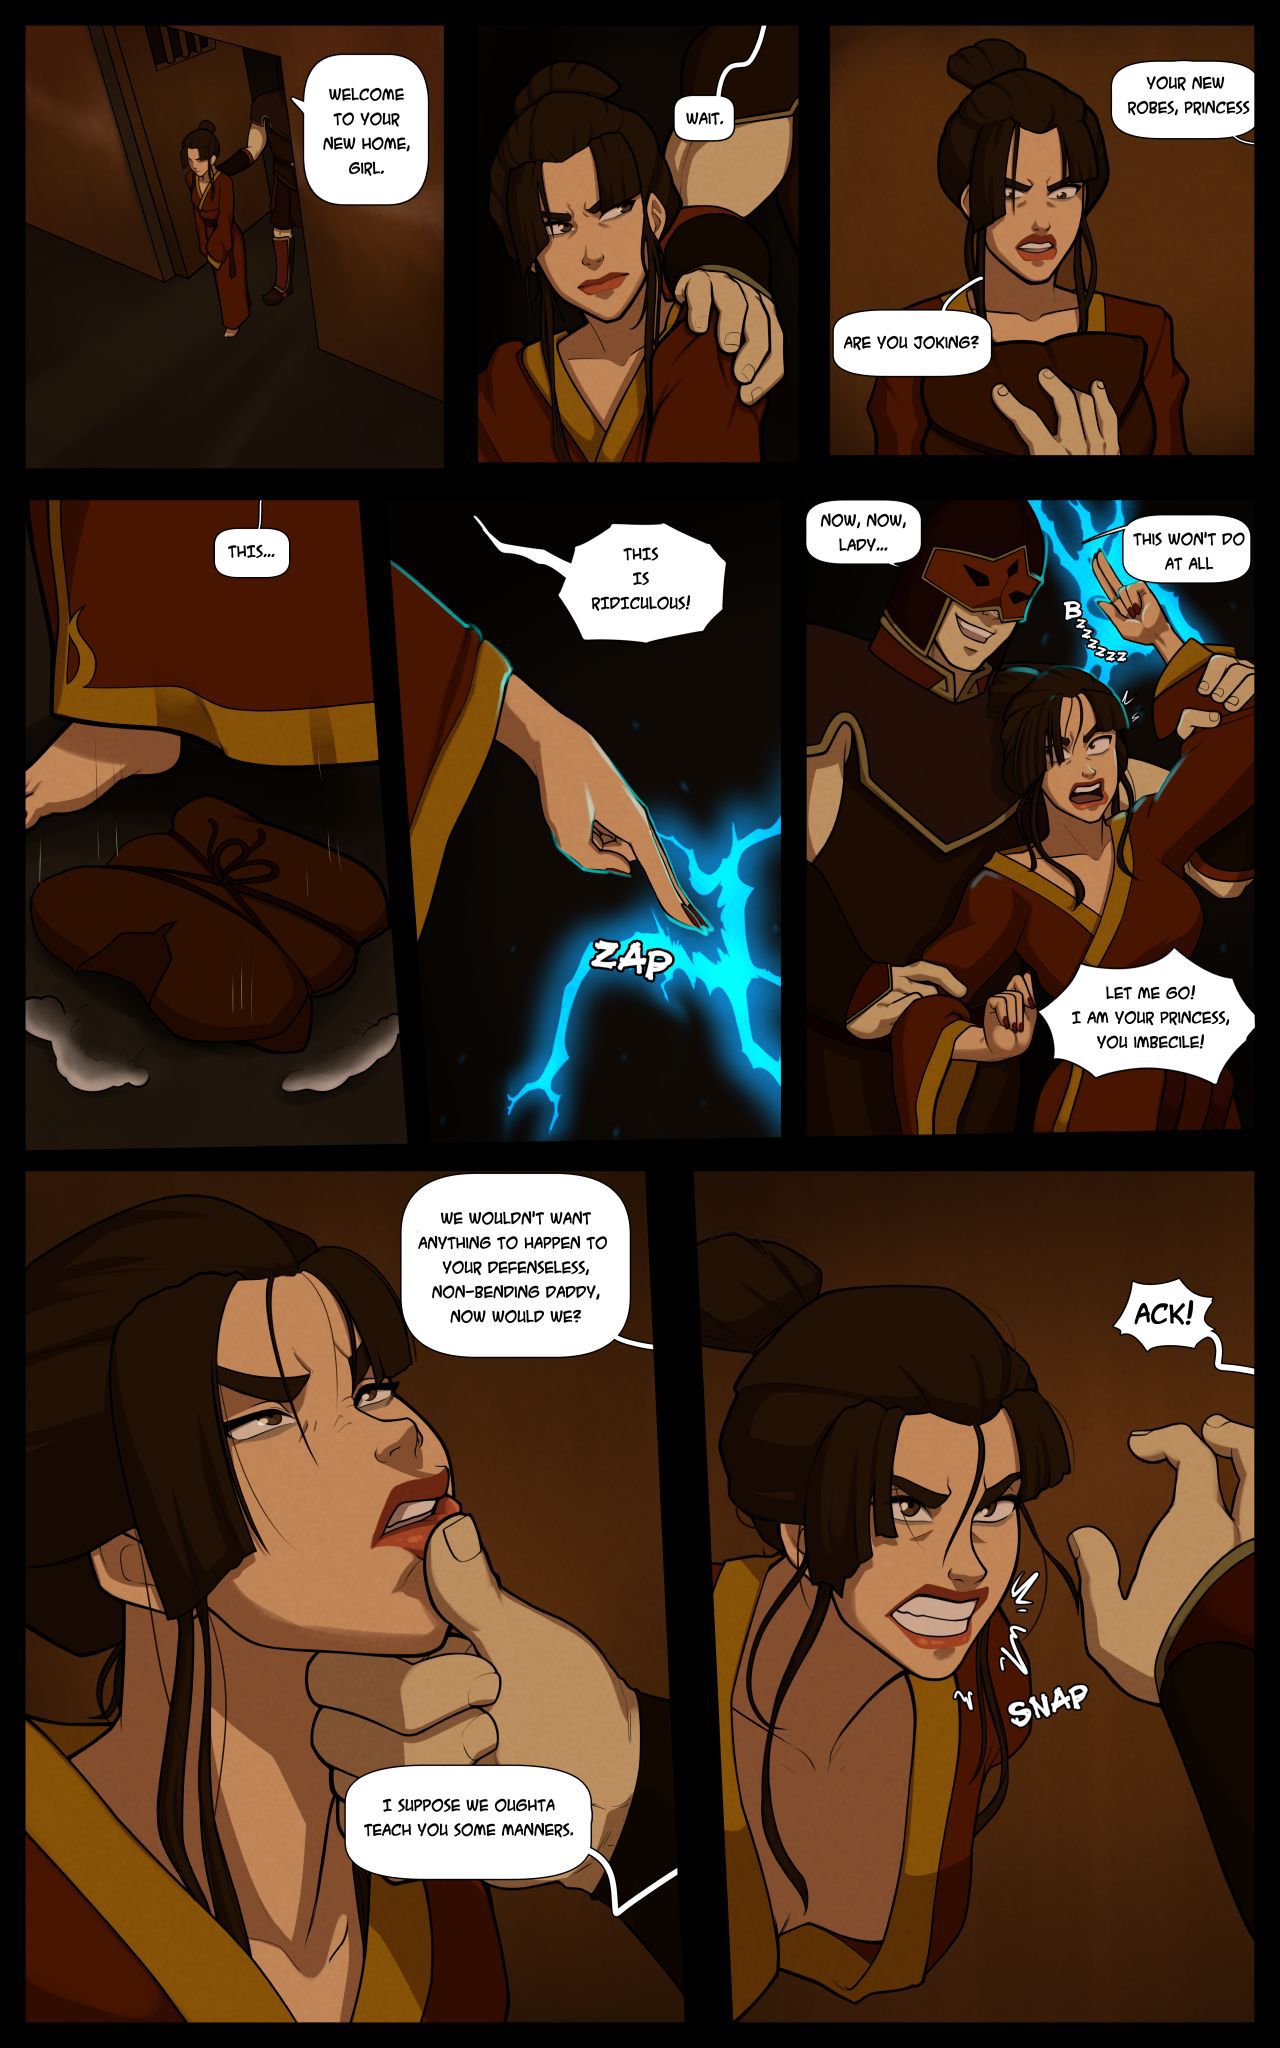 [MrPotatoParty] Azula - The Boiling Rock (Avatar: The Last Airbender) [Ongoing] 3